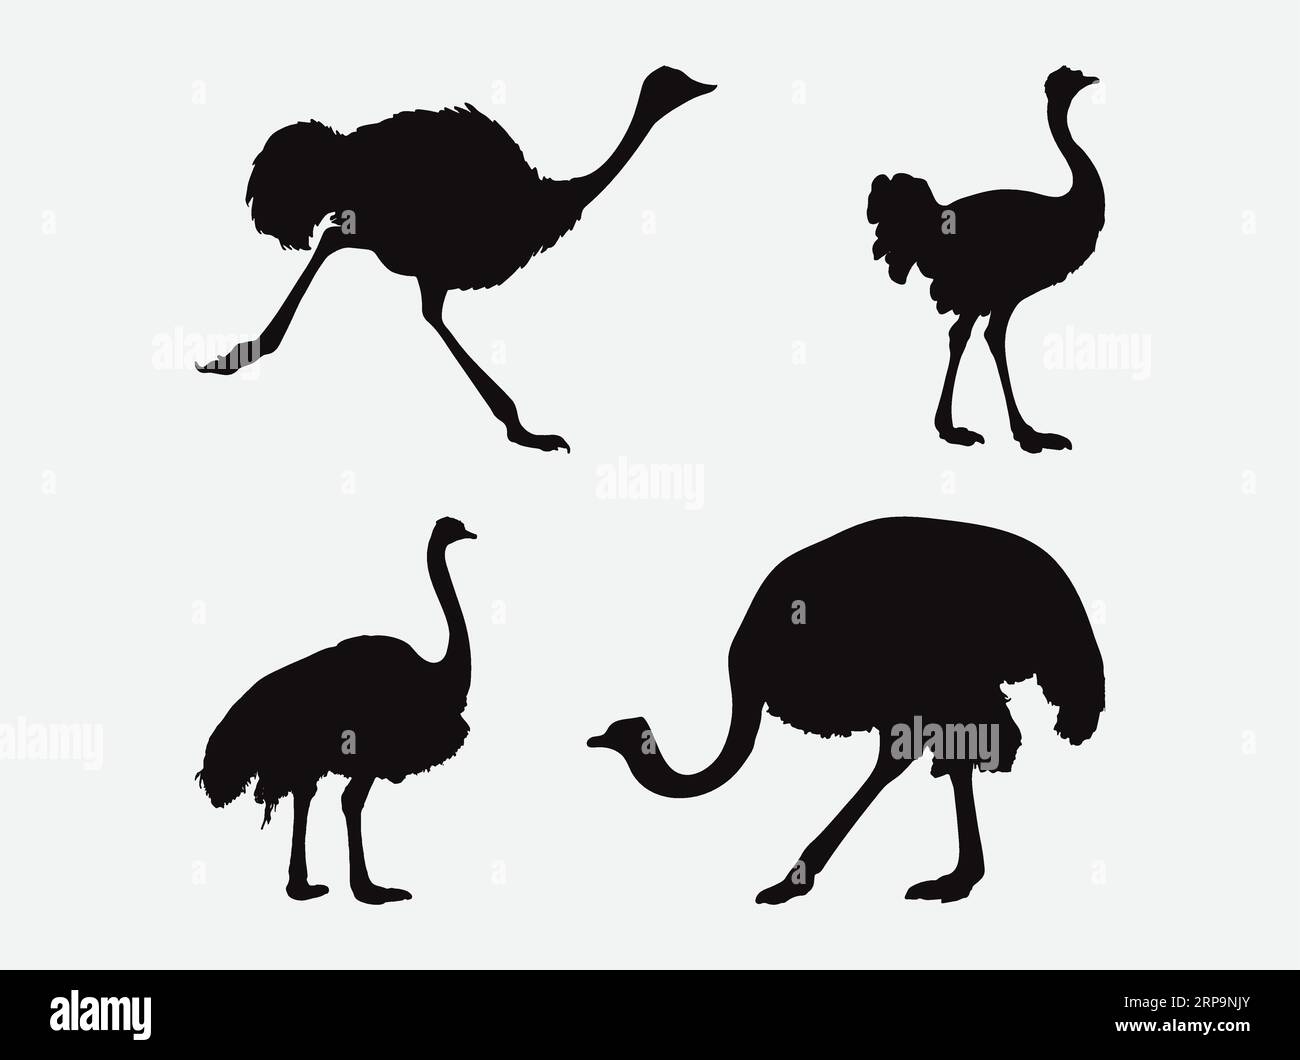 Elegant Ostrich Silhouettes Collection, Graceful Bird Illustrations in Various Poses and Styles Stock Vector